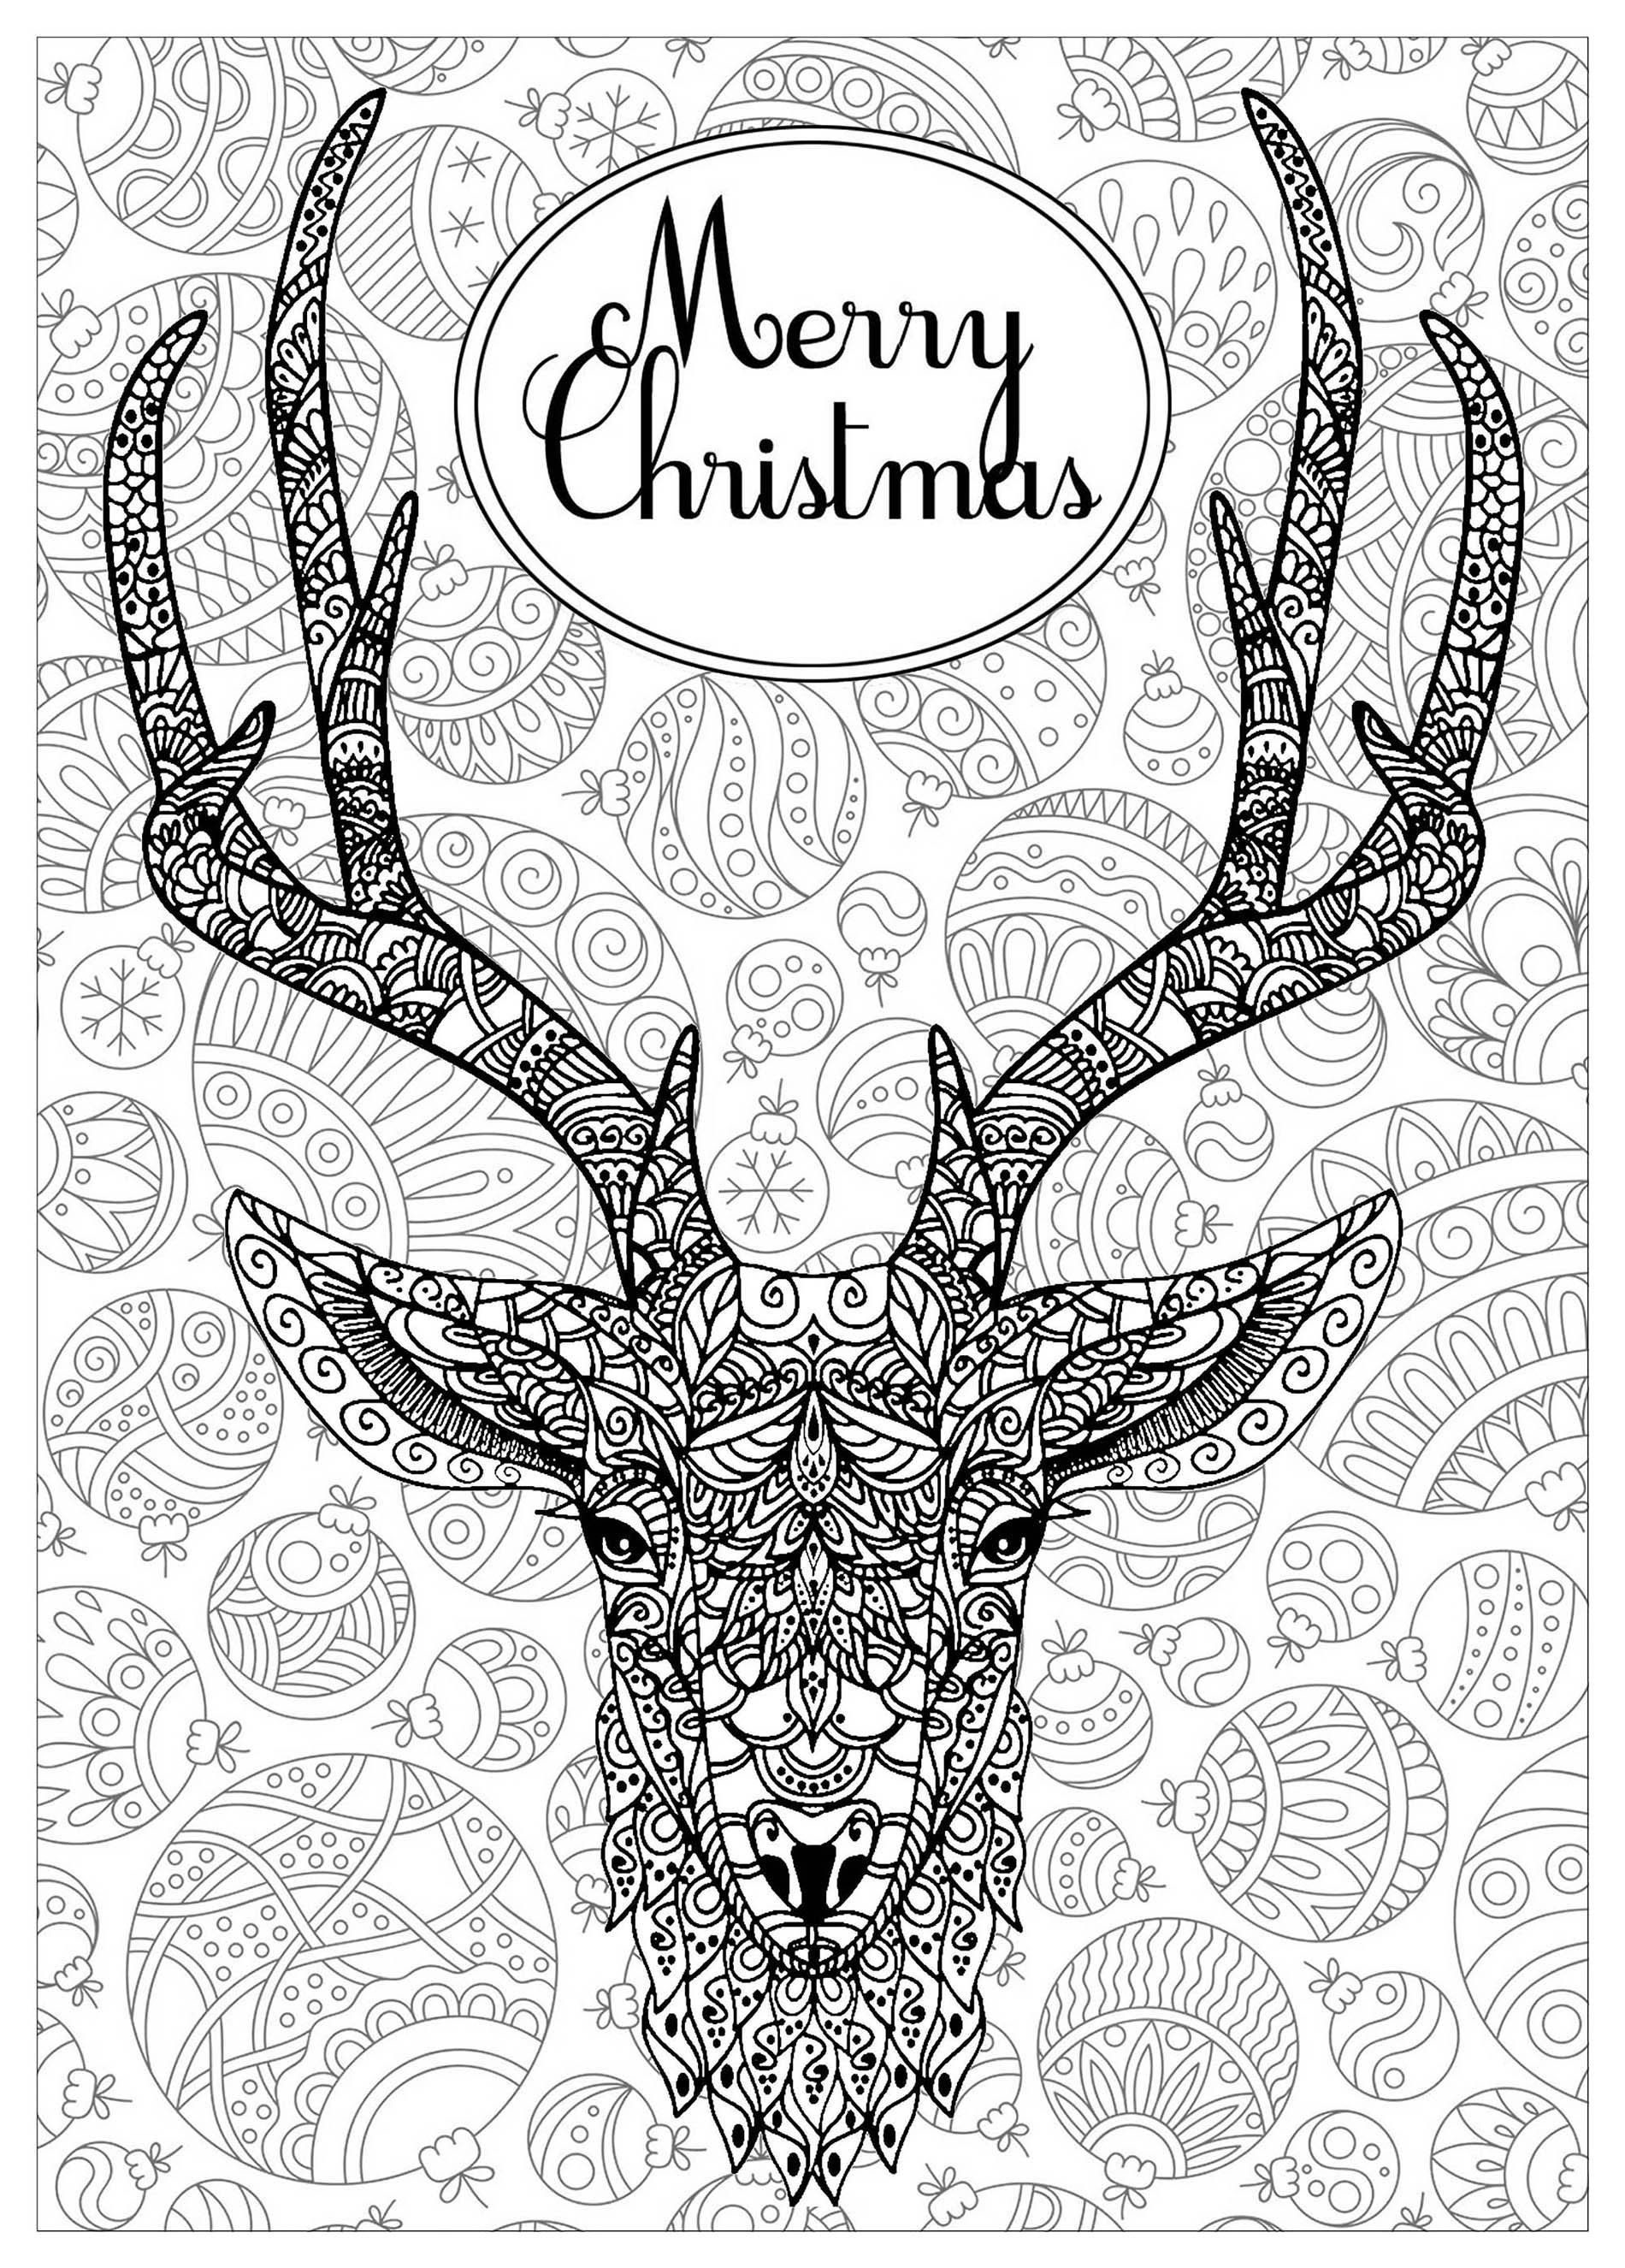 Download Deer with text and background - Christmas Adult Coloring Pages